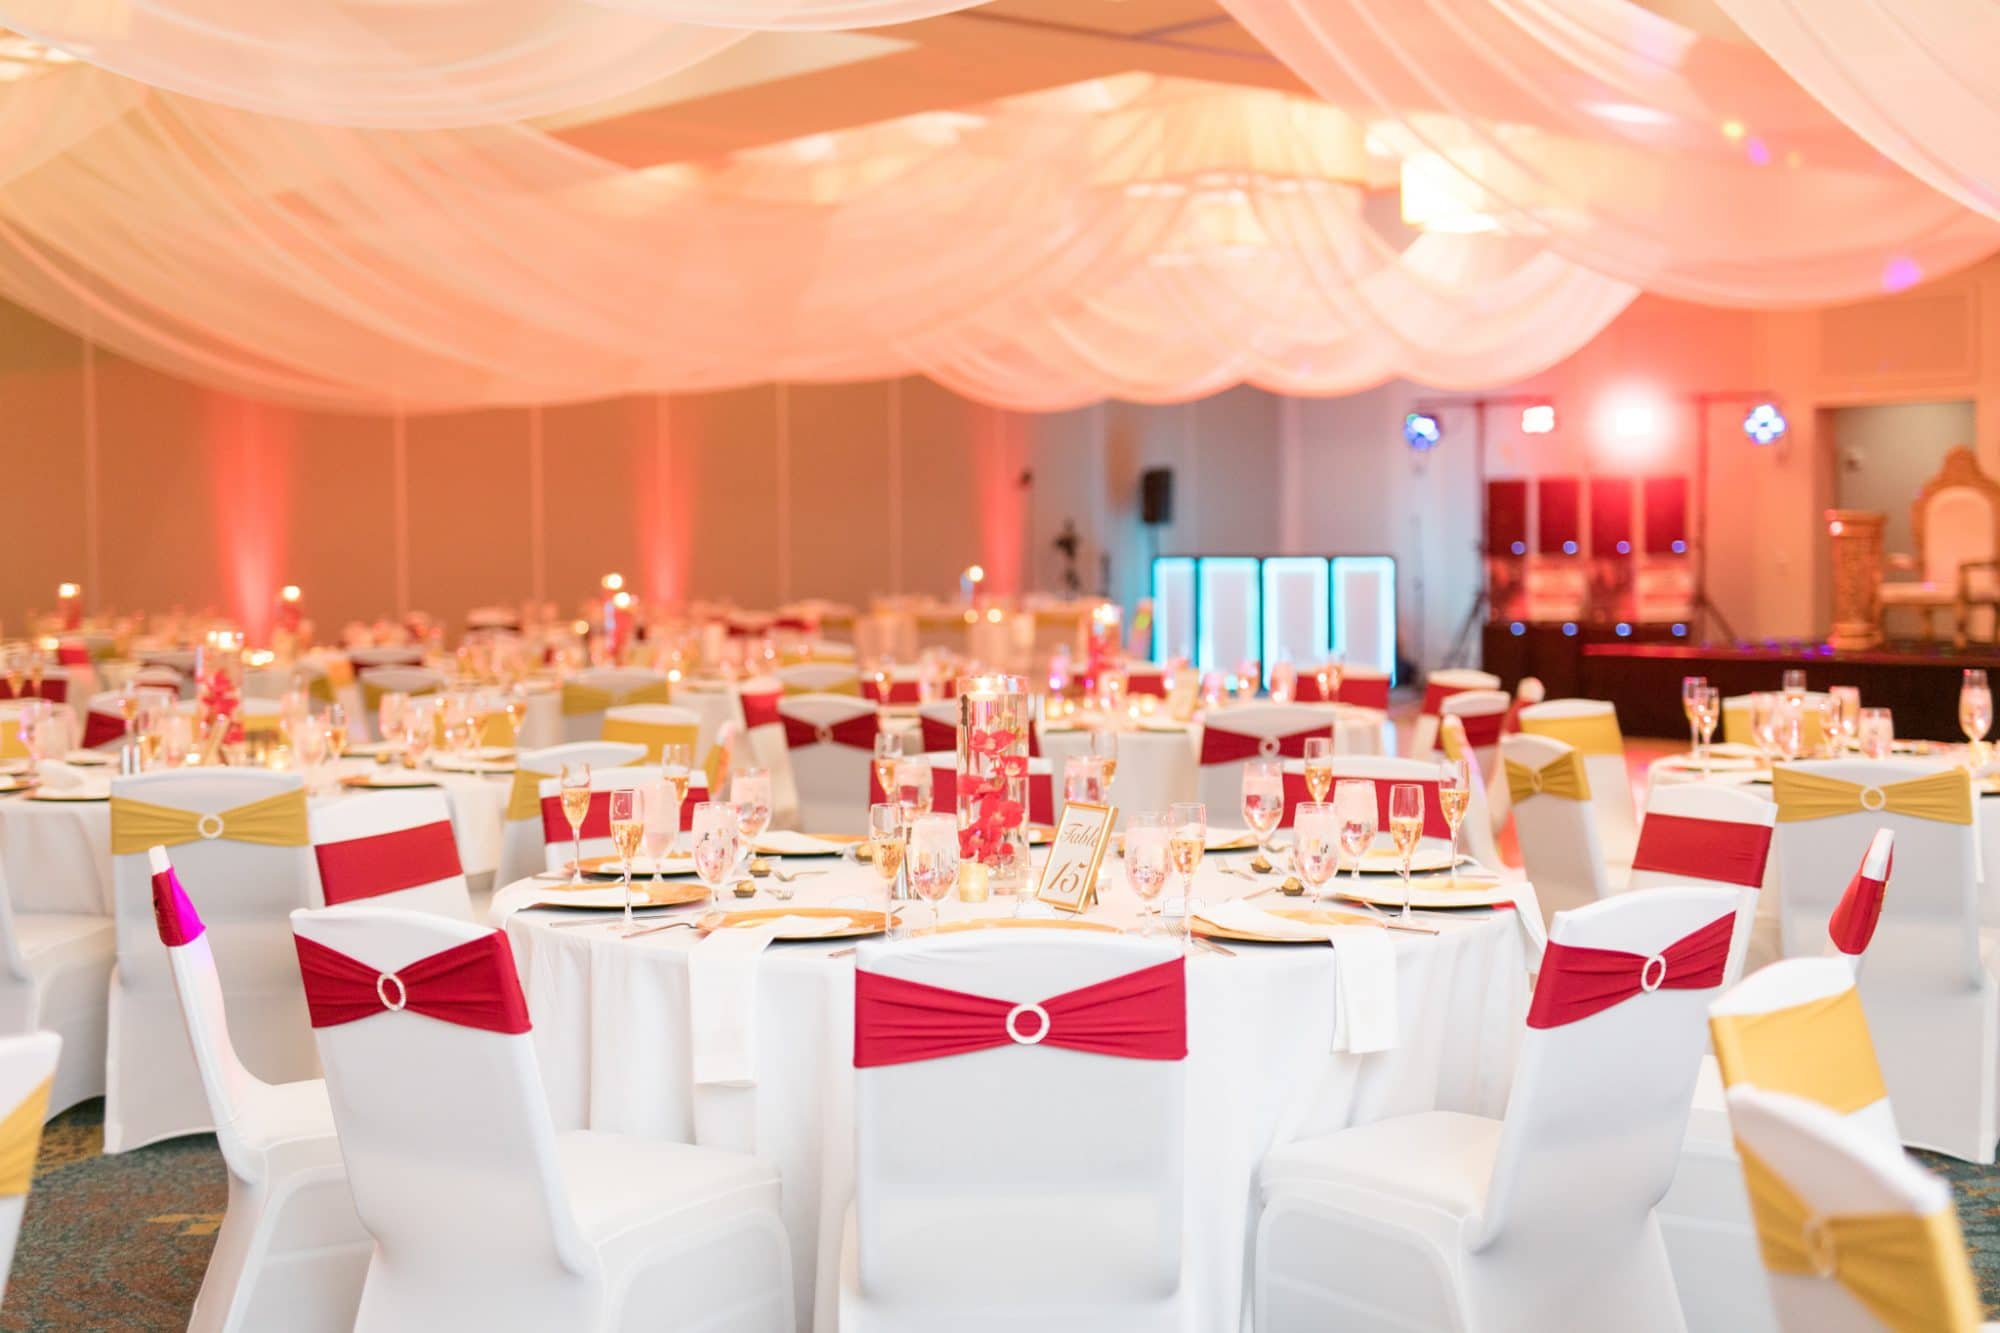 Westin Lake Mary - large ballroom with loose, romantic ceiling drapery